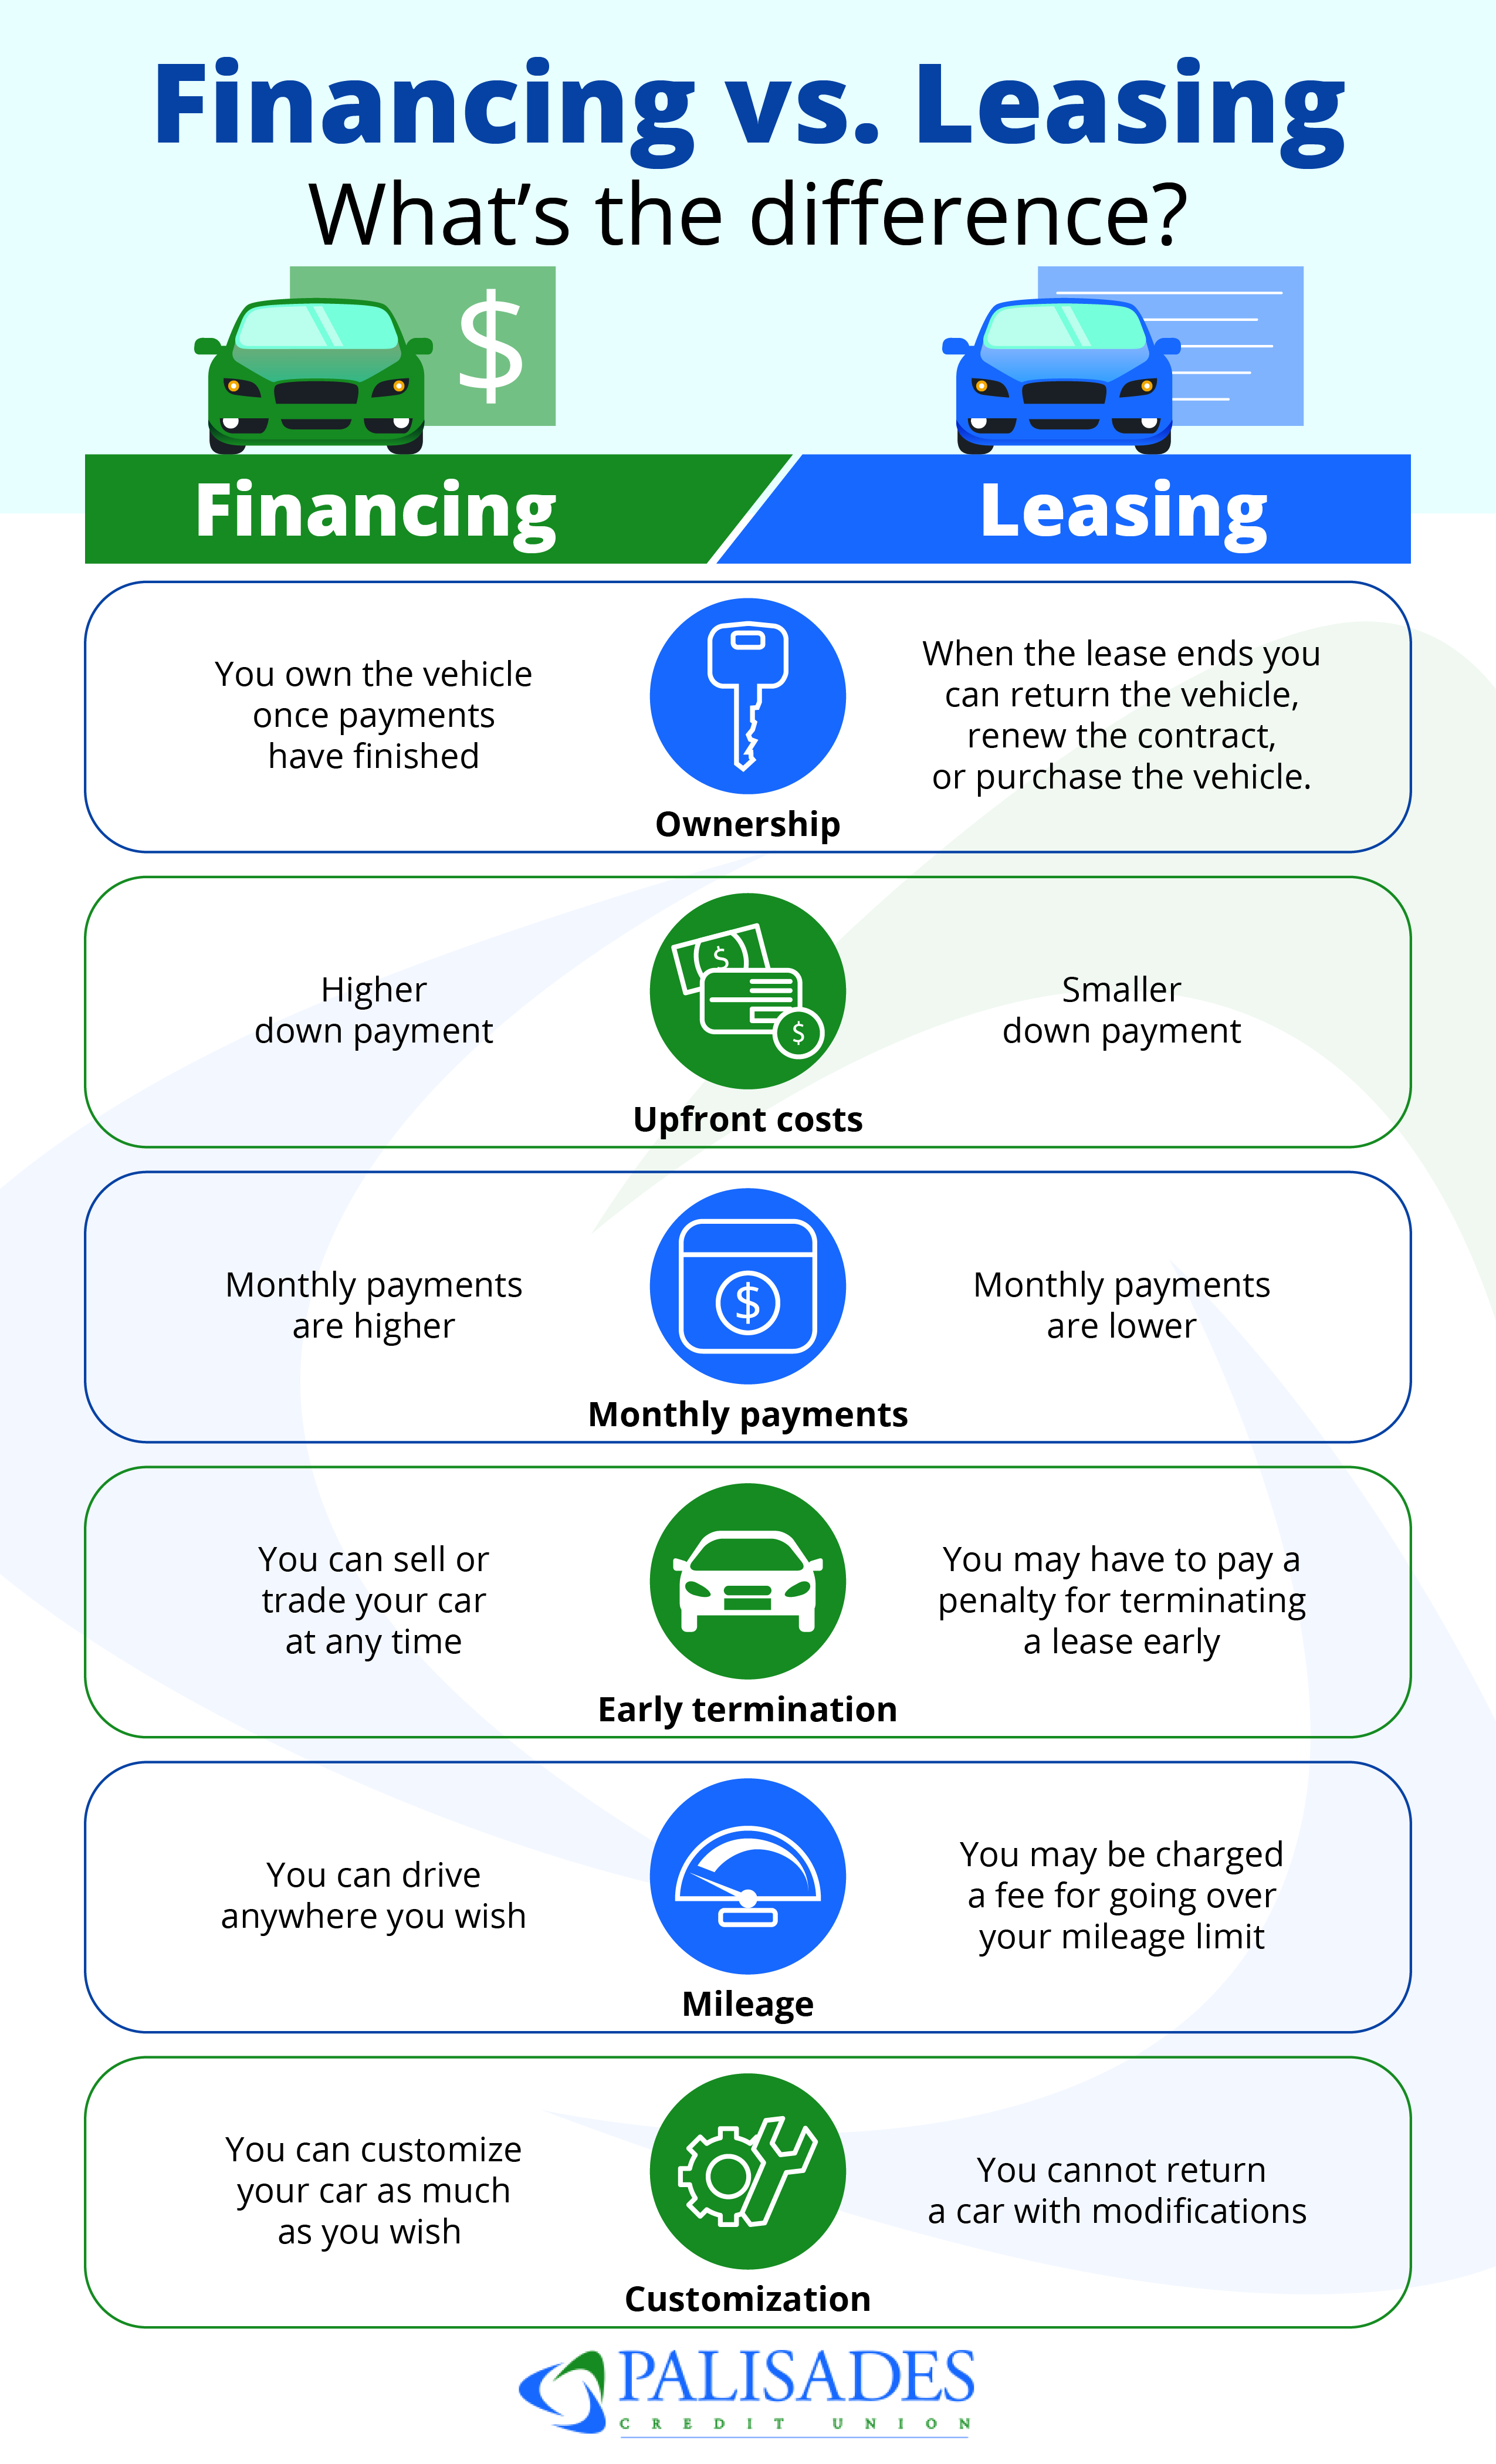 Financing vs. Leasing A Car. What's the Difference: Financing    You own the vehicle once payments have finished Monthly payments are higher Higher down payment You can sell or trade your car at any time You can drive anywhere you wish You can customize your car as much as you wish    Leasing  When the lease ends you can return the vehicle, renew the contract, or purchase the vehicle. Monthly payments are lower Smaller down payment You may have to pay a penalty for terminating a lease early You may be charged a fee for going over your mileage limit You cannot return a car with modifications 